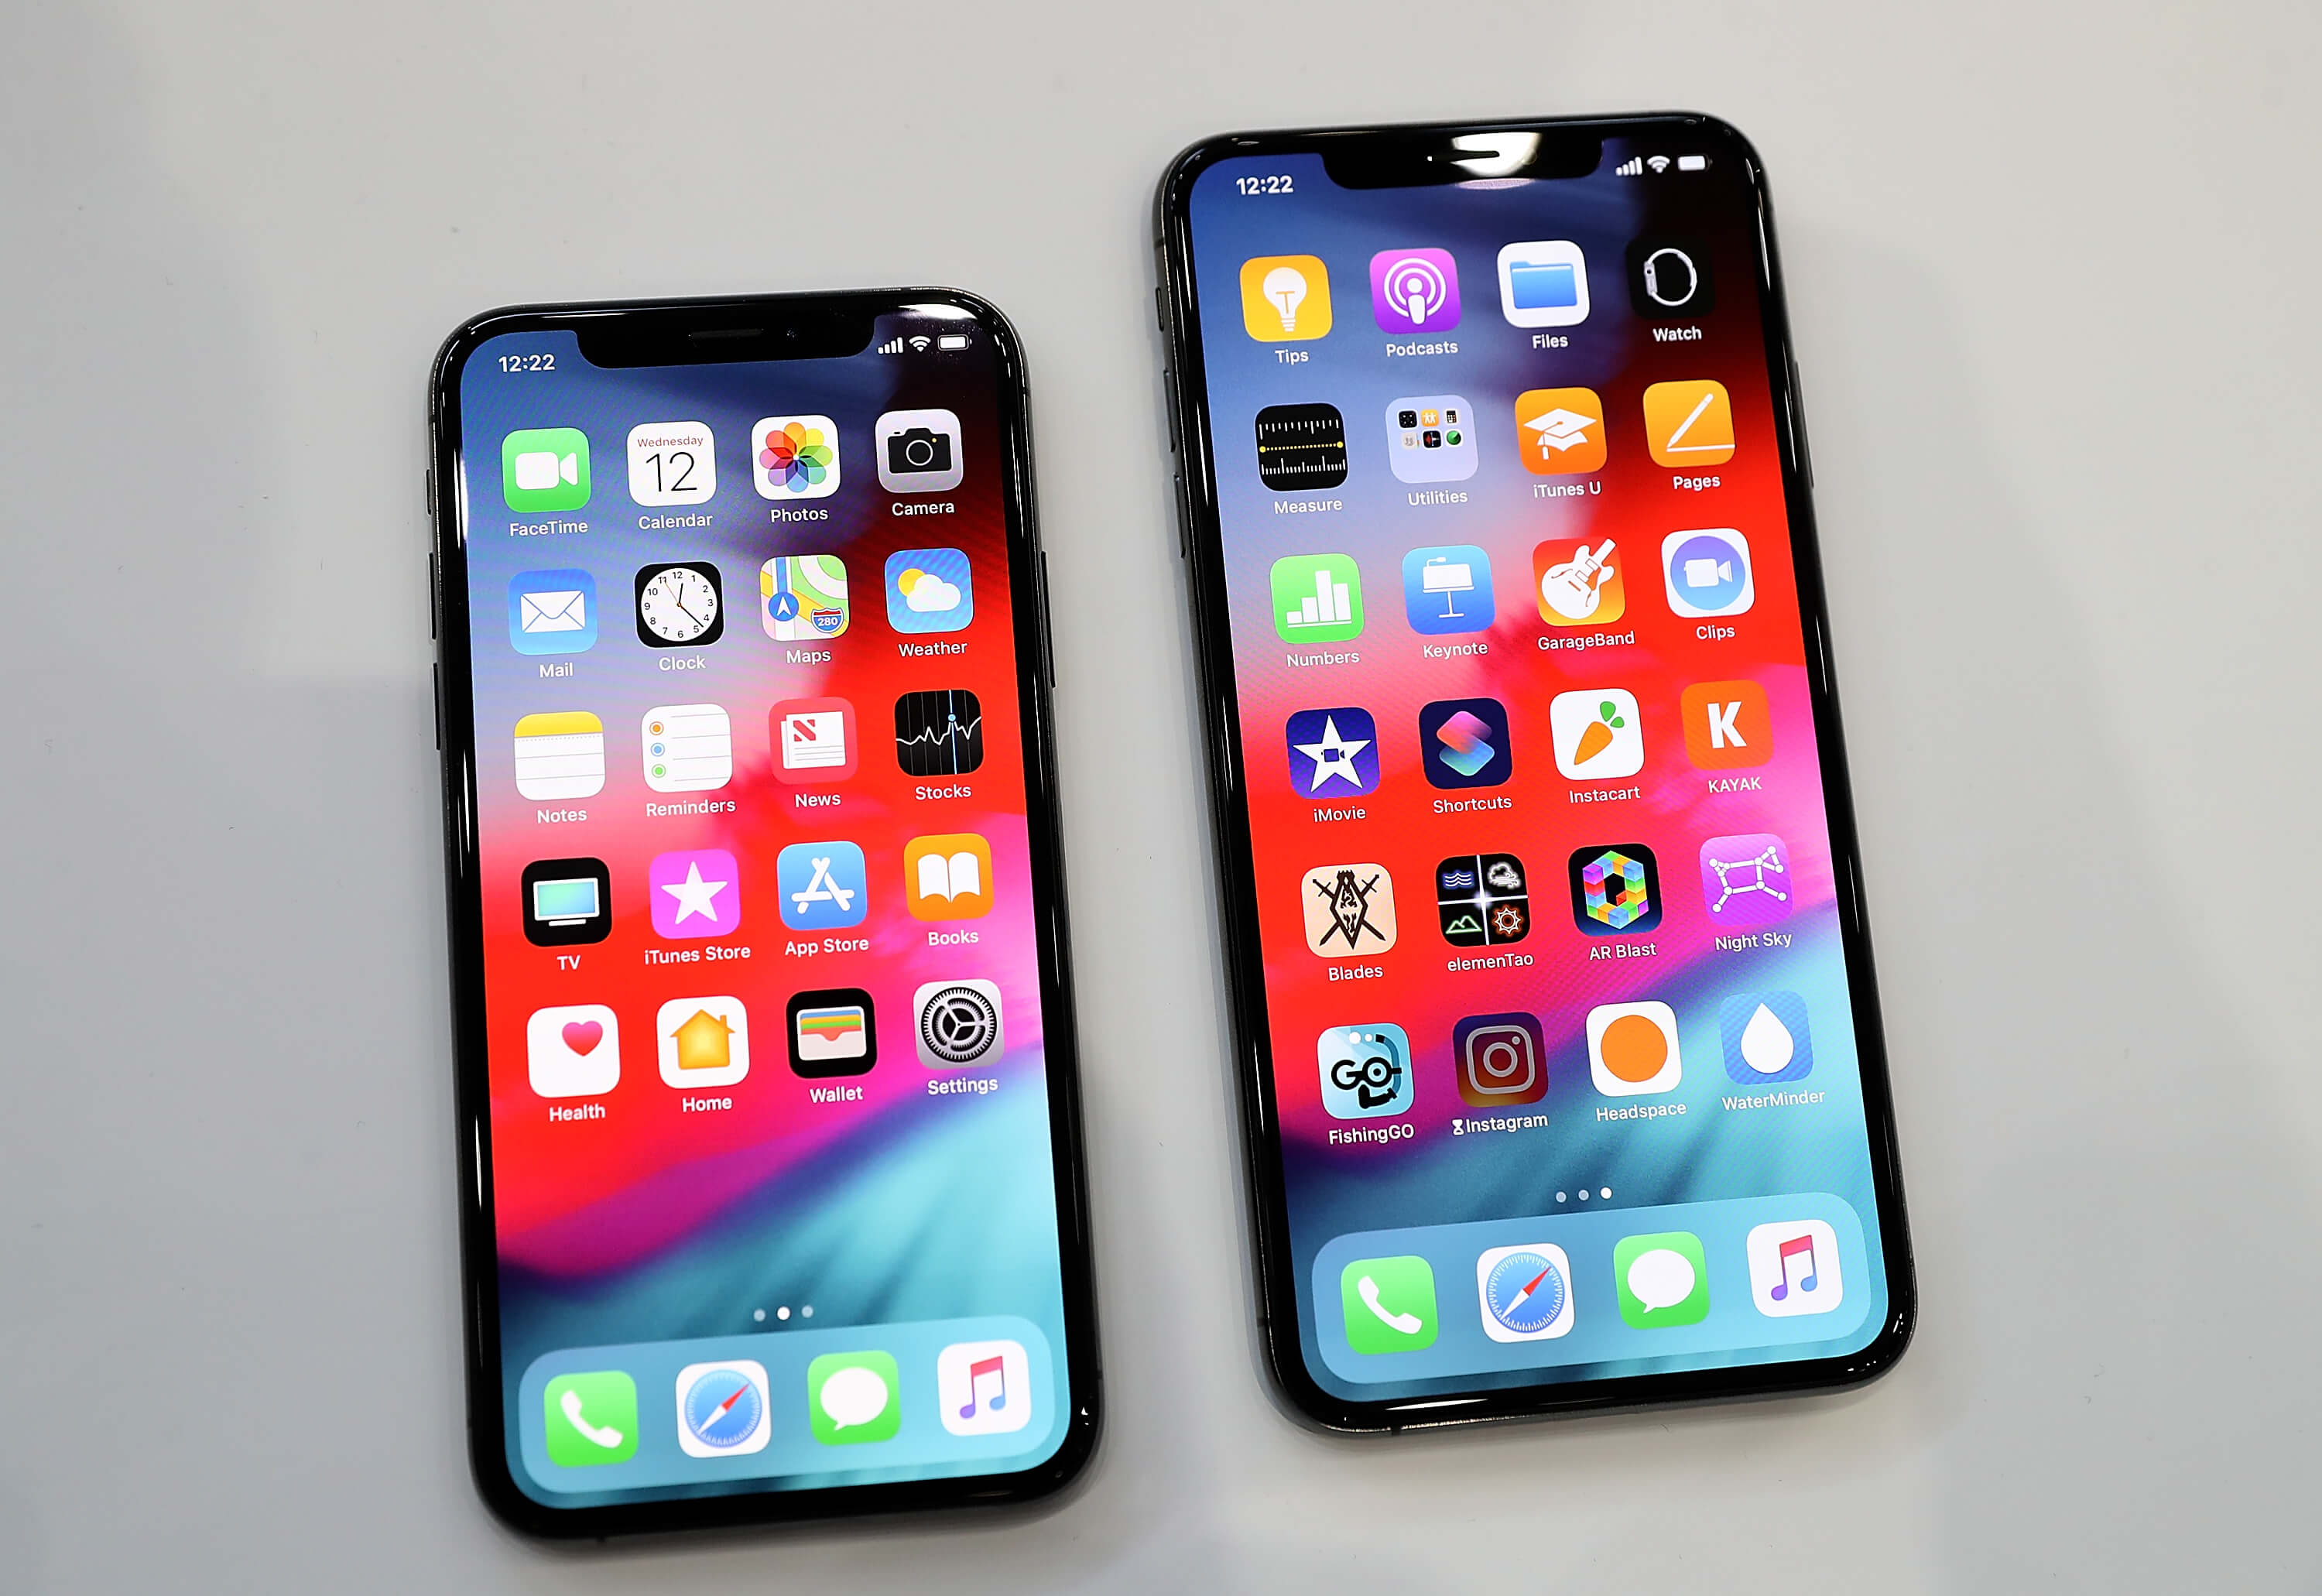 Installing iOS 12.1.2 might break cellular data, calling, and messaging